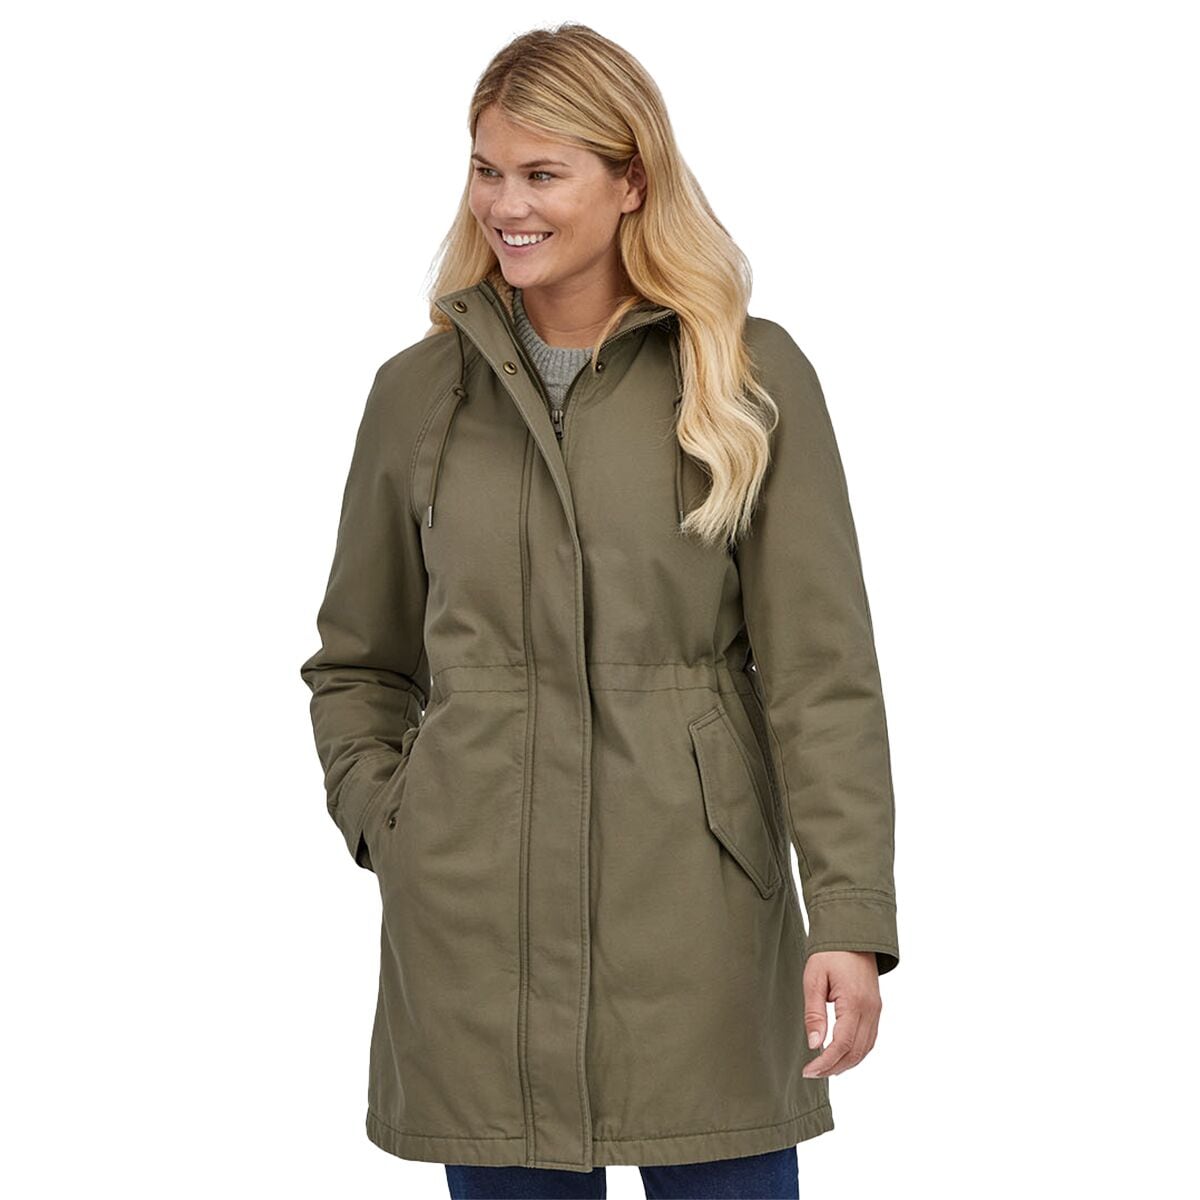 Patagonia Prairie Dawn Insulated Parka - Women's - Clothing | Backcountry